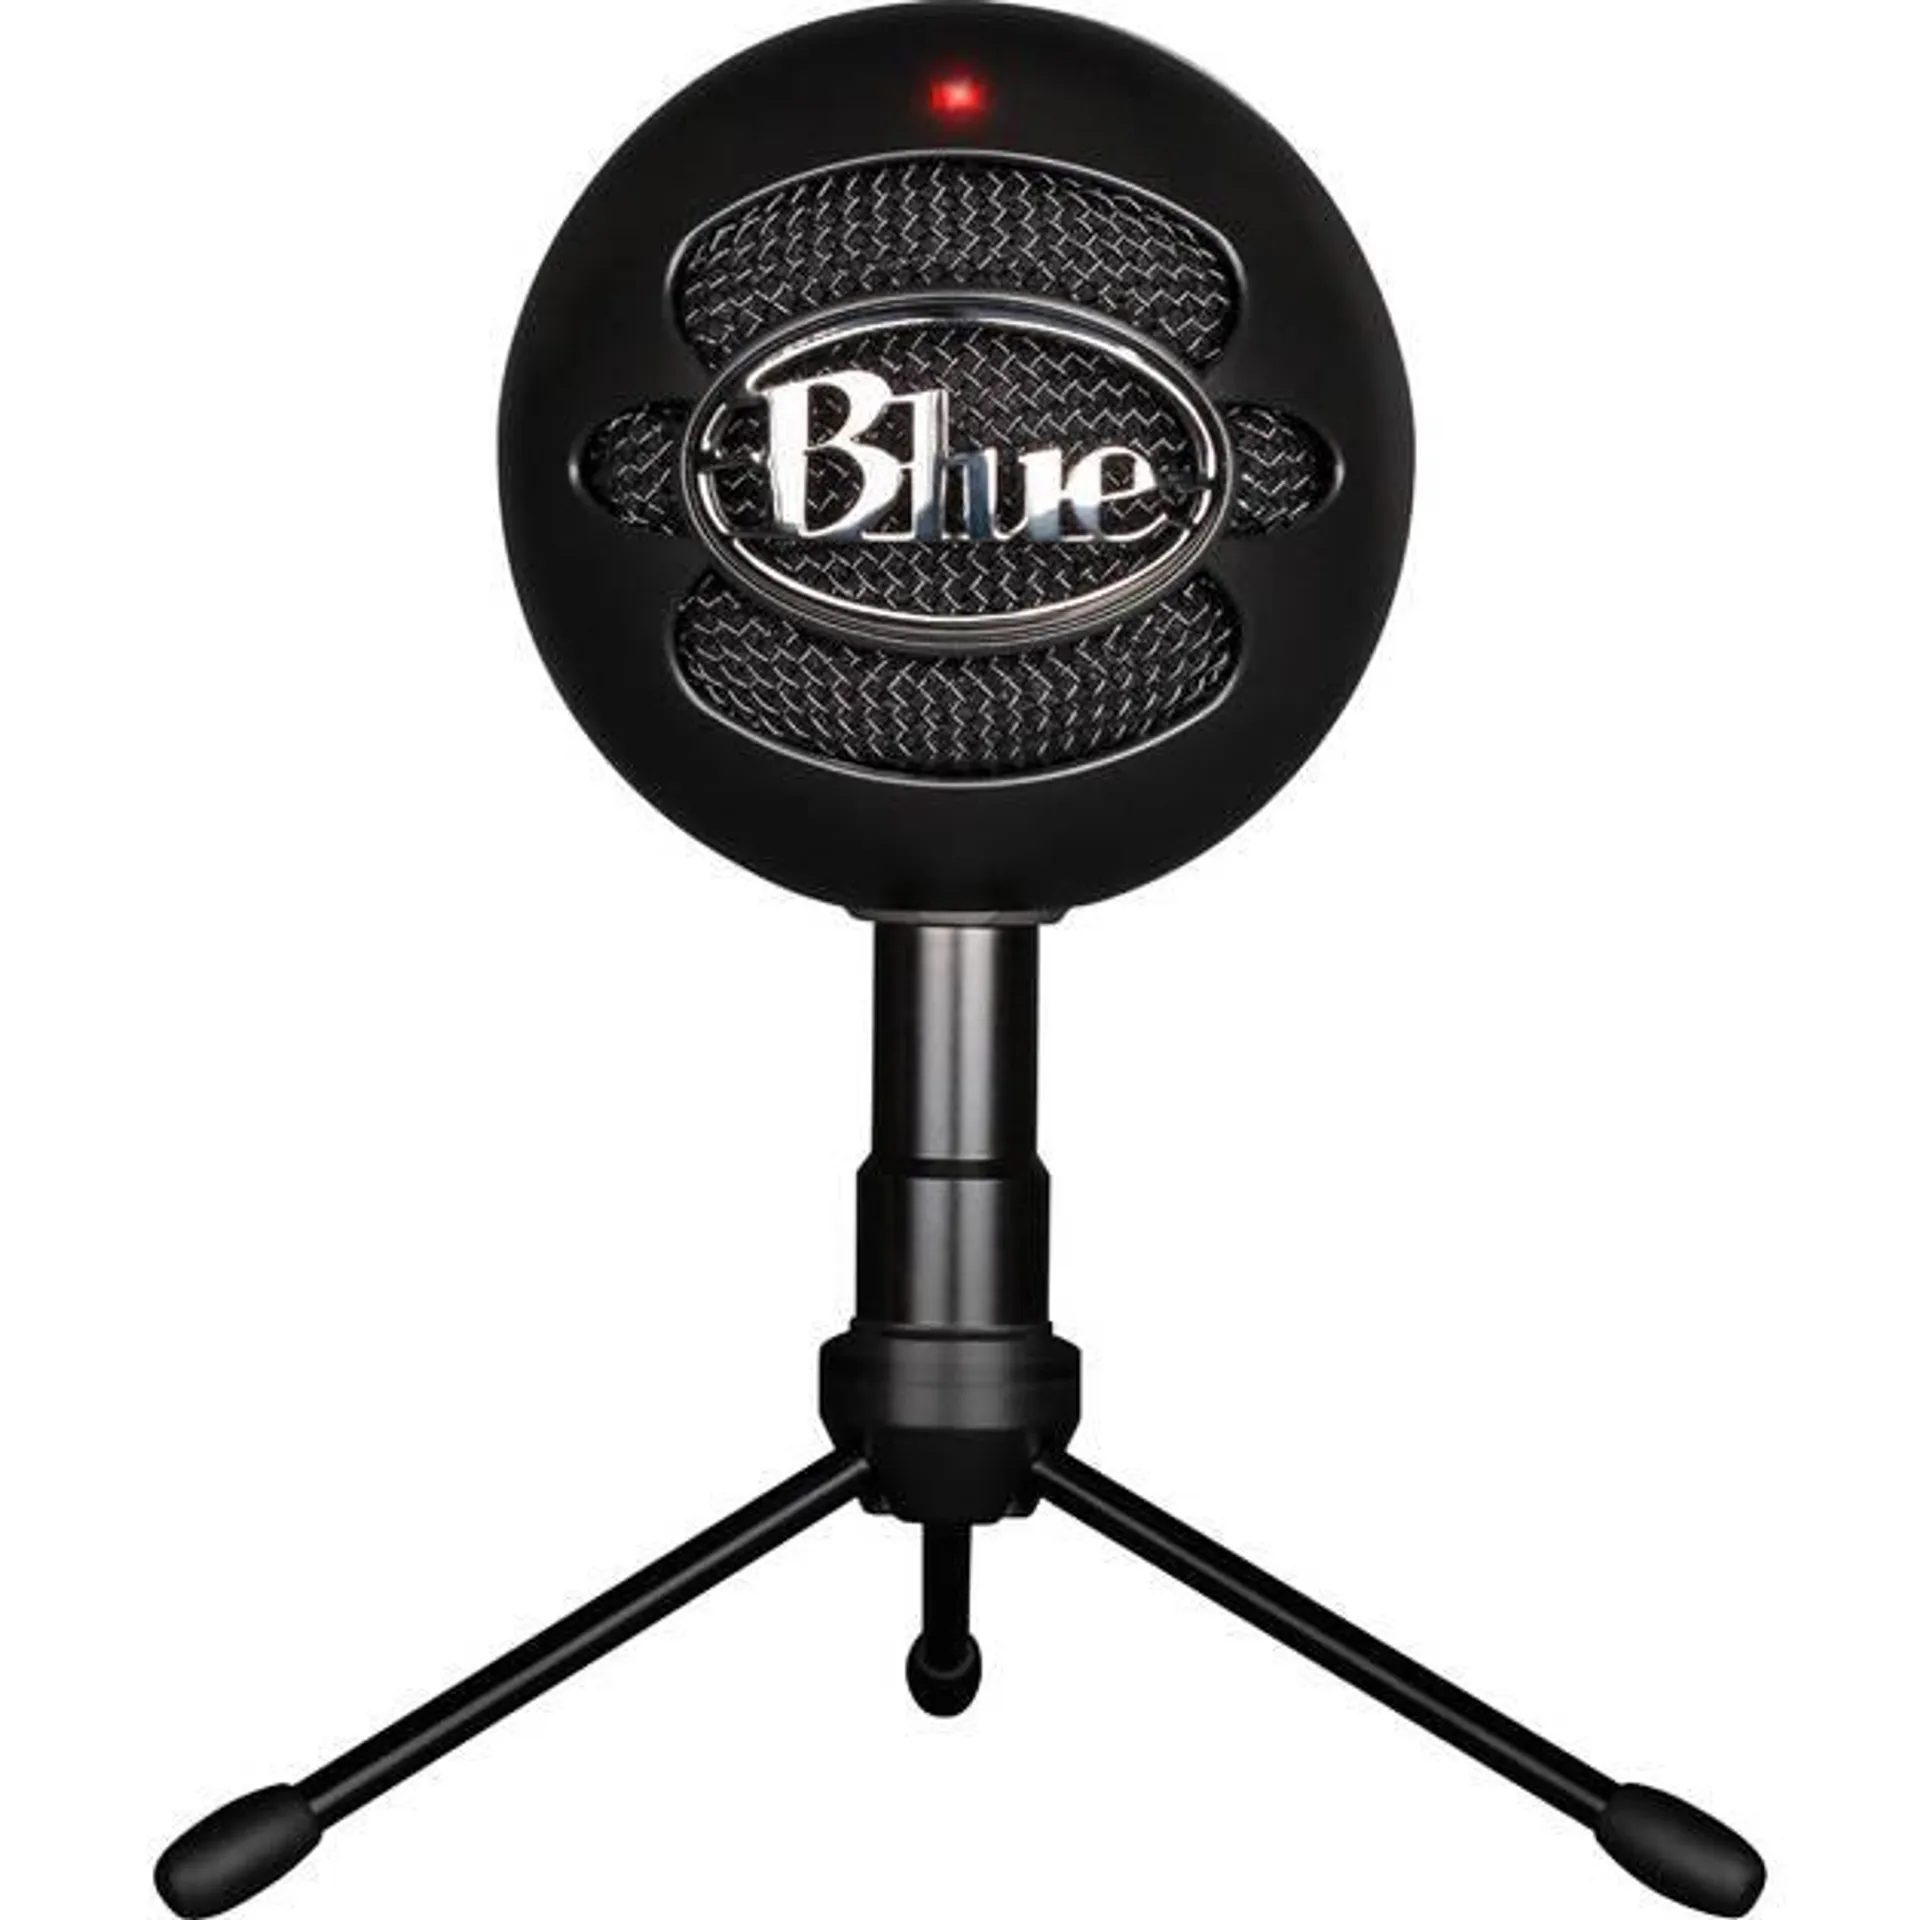 Blue Microphones Snowball Microphone promo